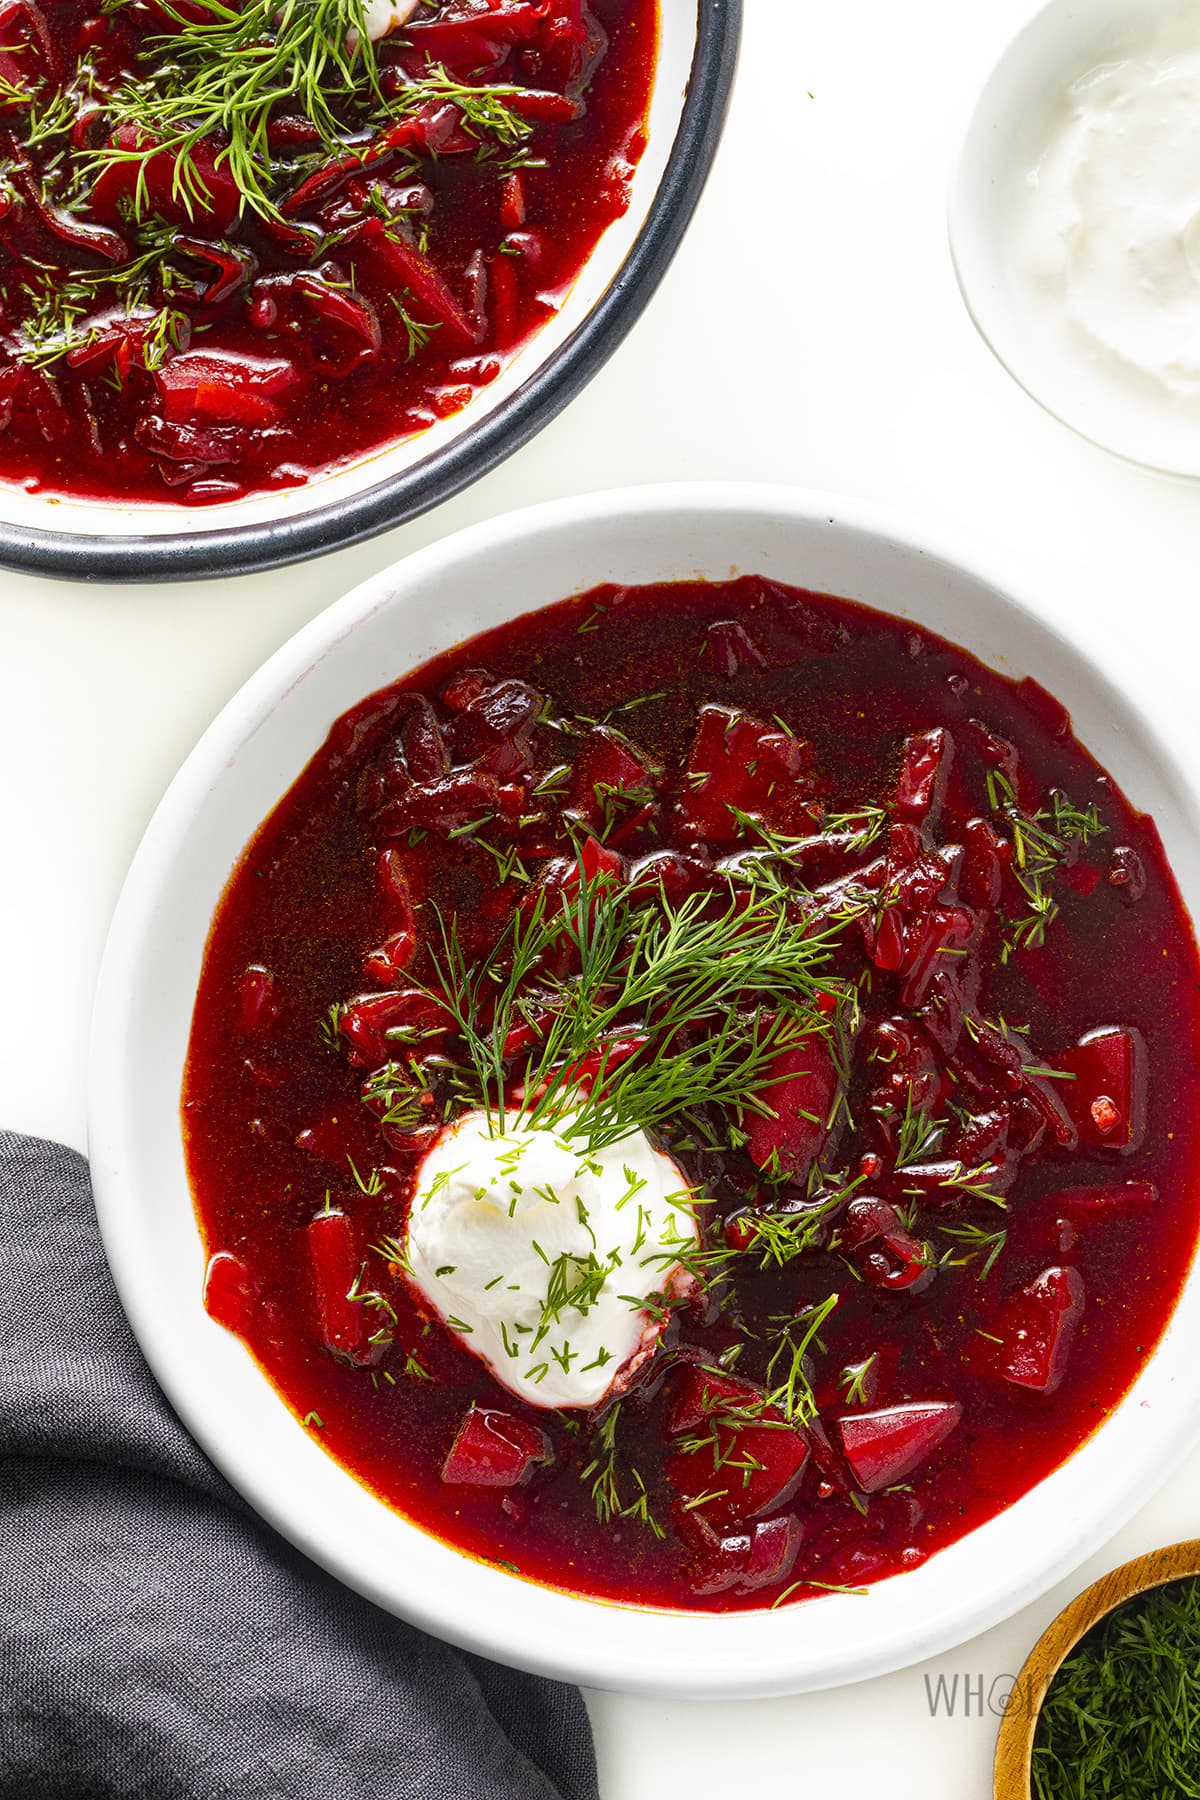 Beet soup in bowls with garnishes.